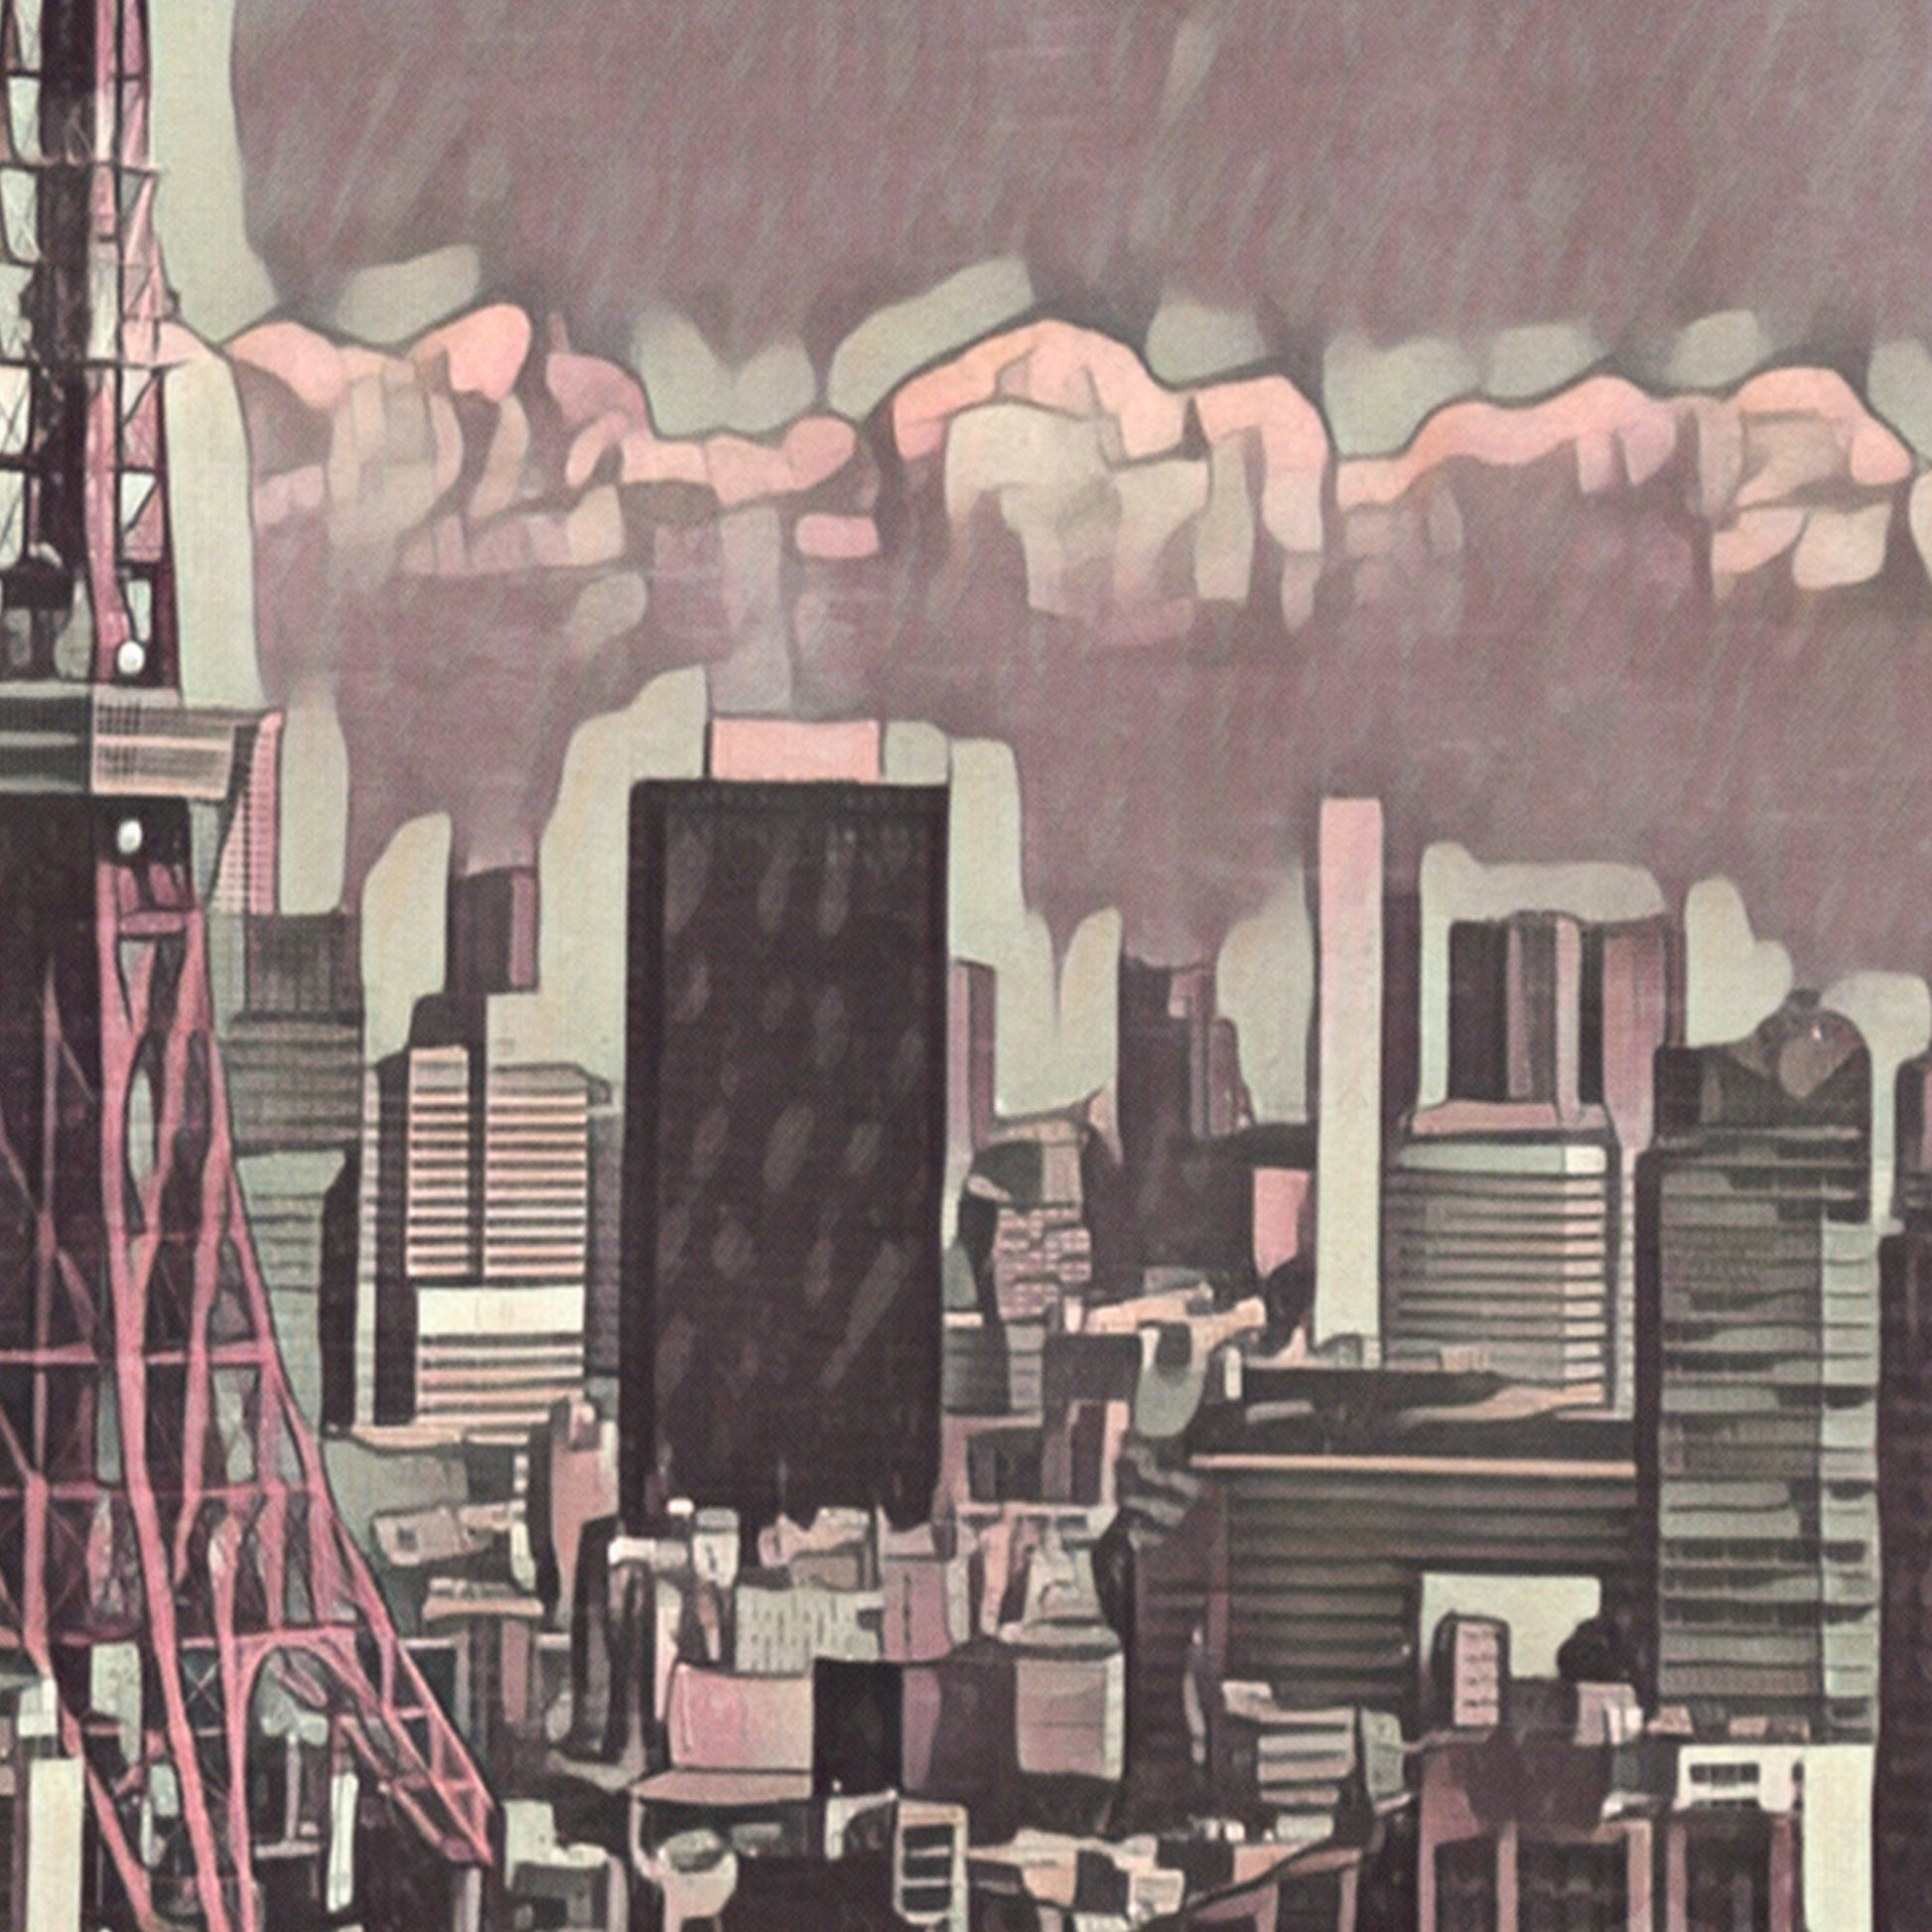 Close up on the building in Tokyo's Metropolis poster by Alecse